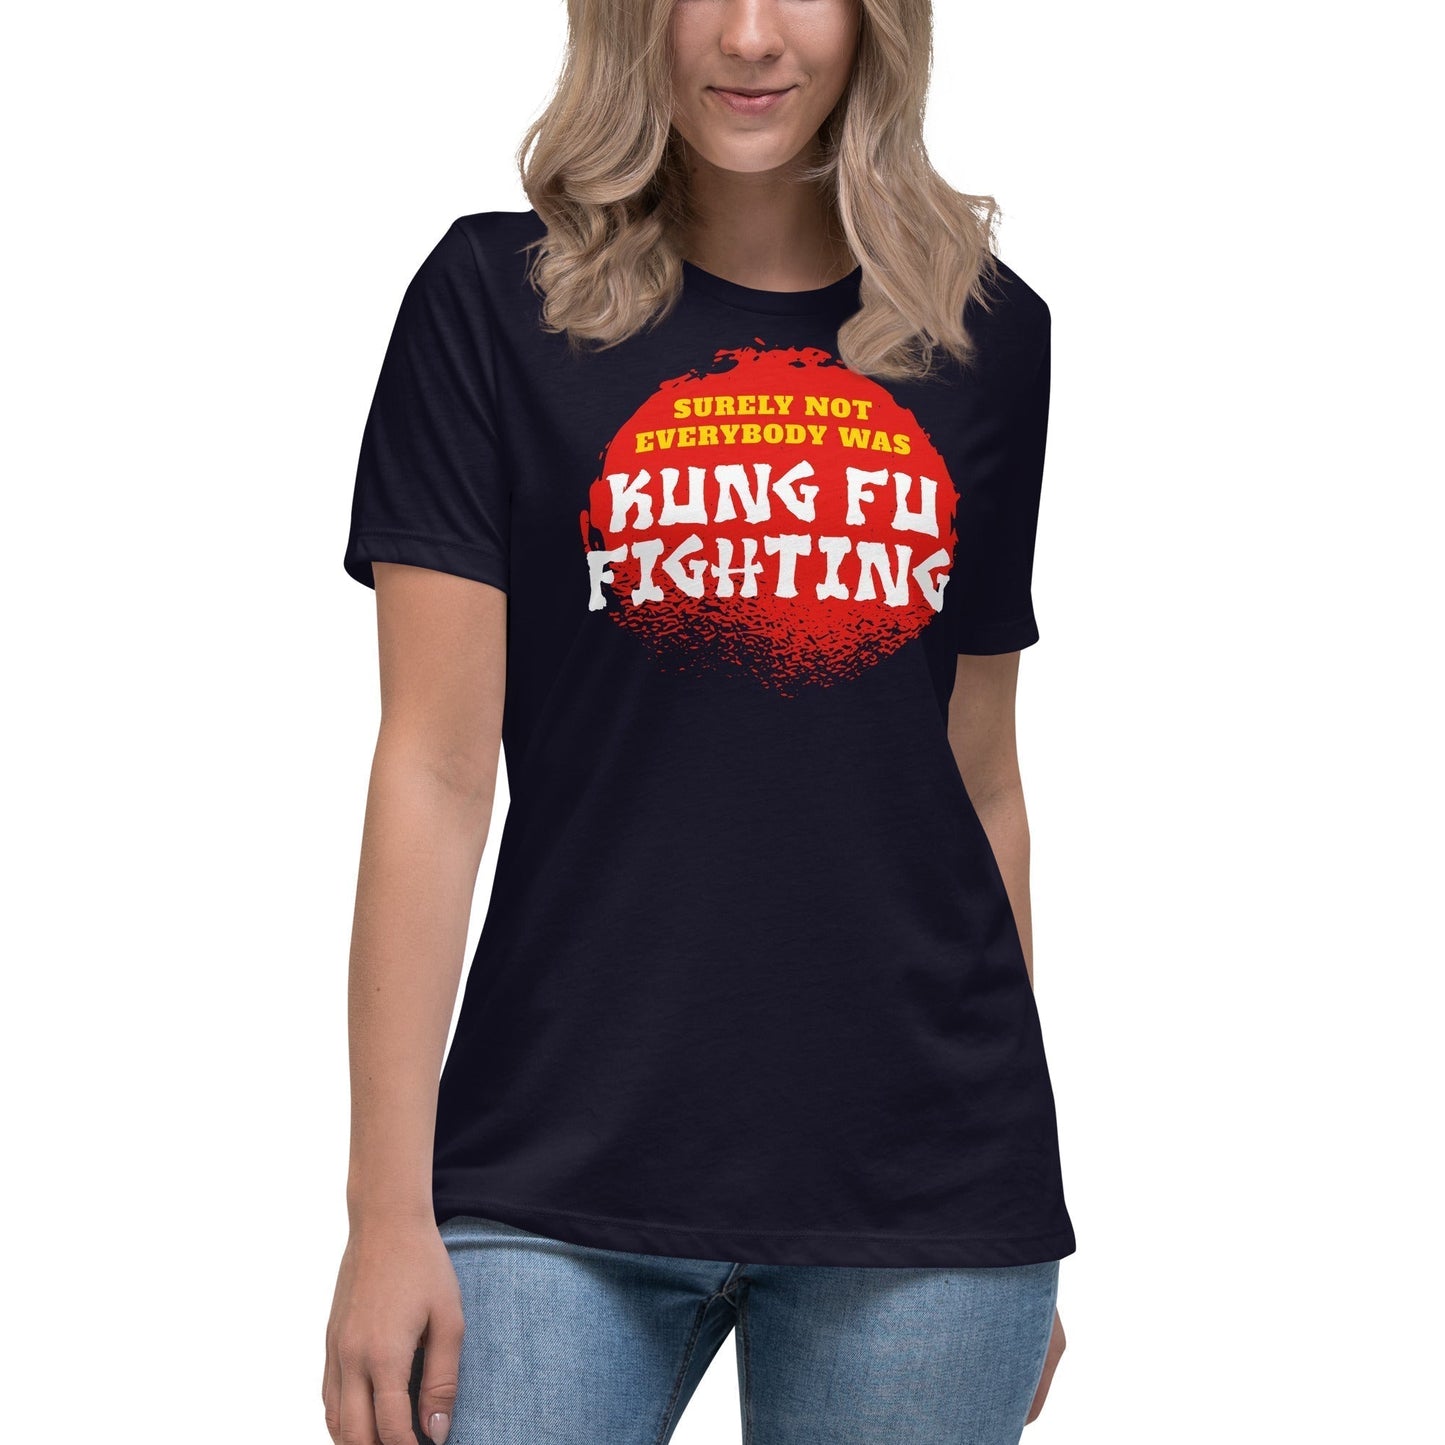 Surely not everybody was Kung Fu fighting - Women's T-Shirt